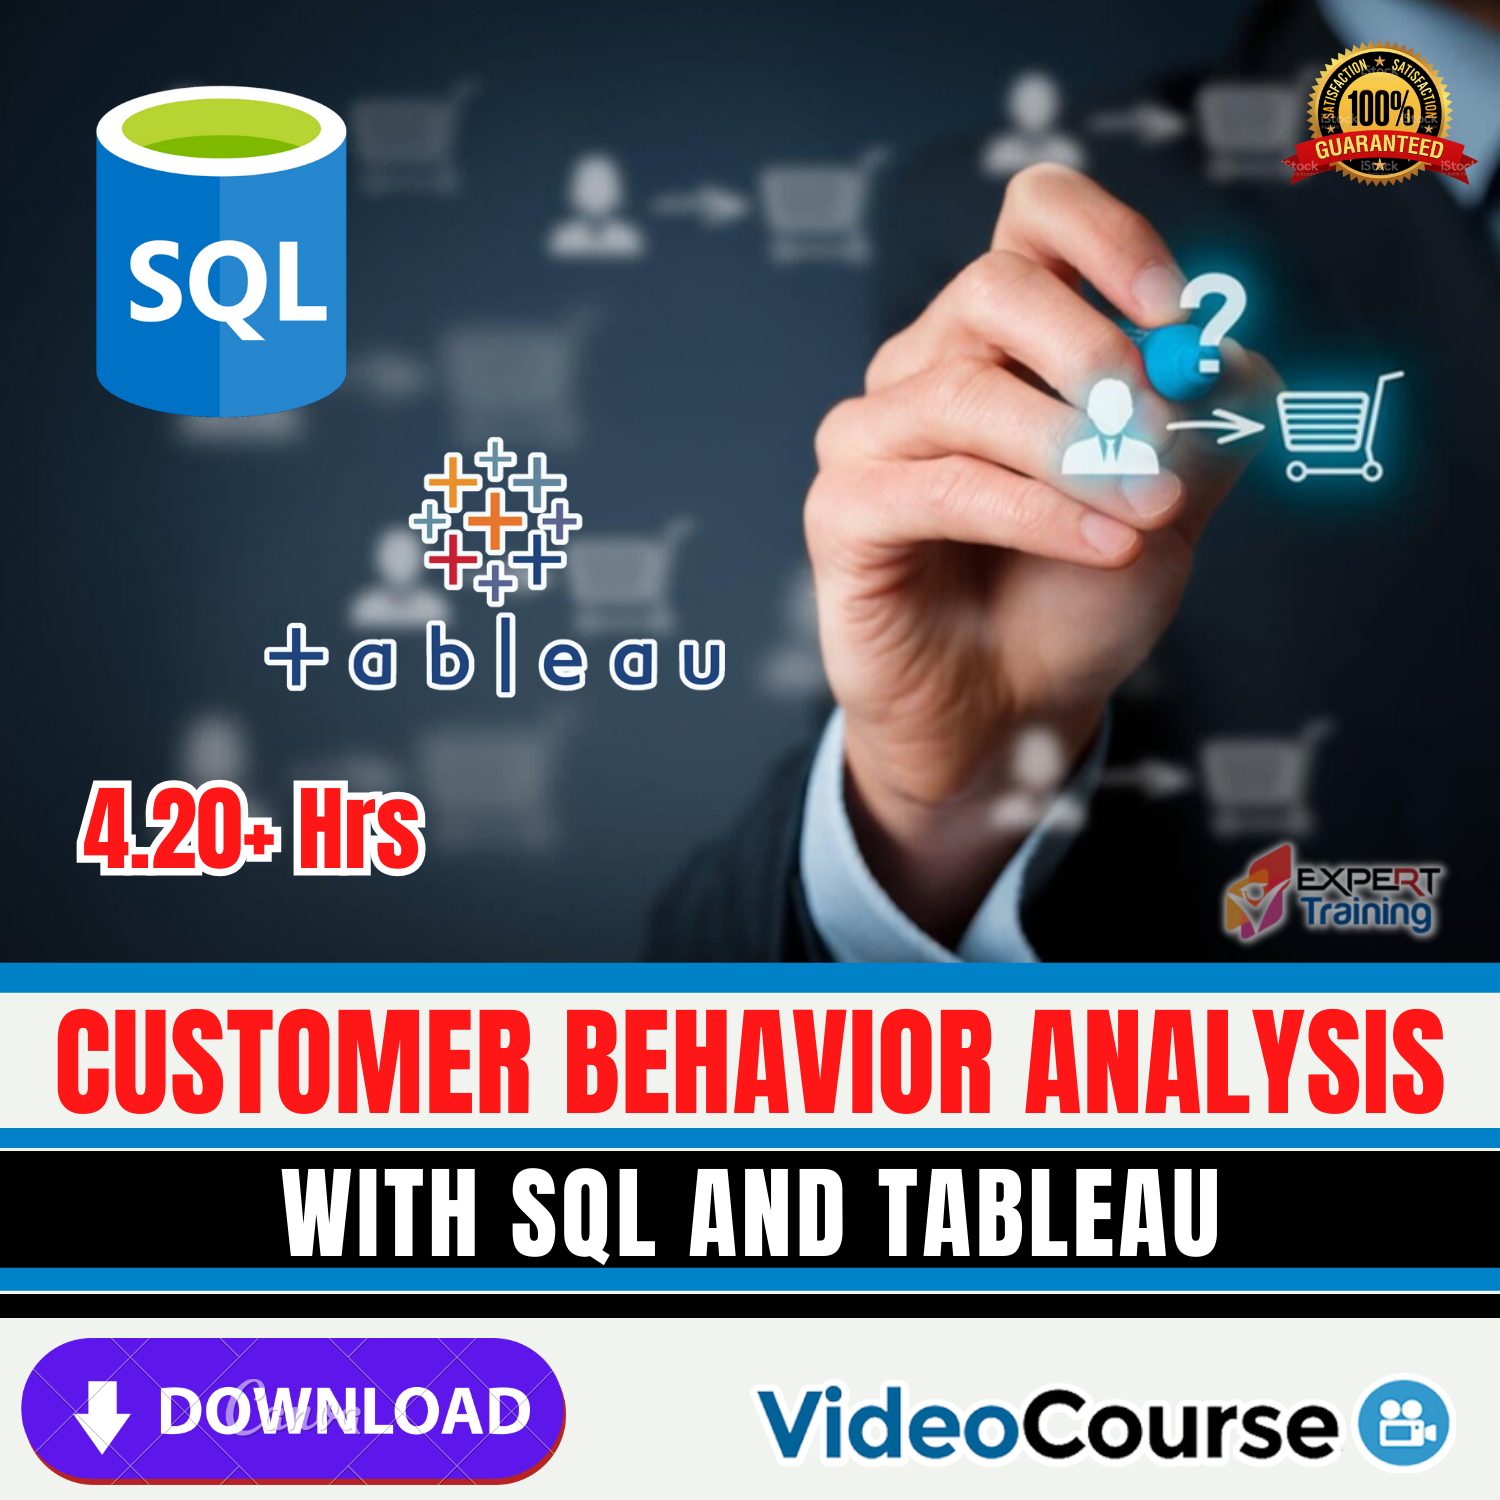 Customer Behavior Analysis with SQL and Tableau